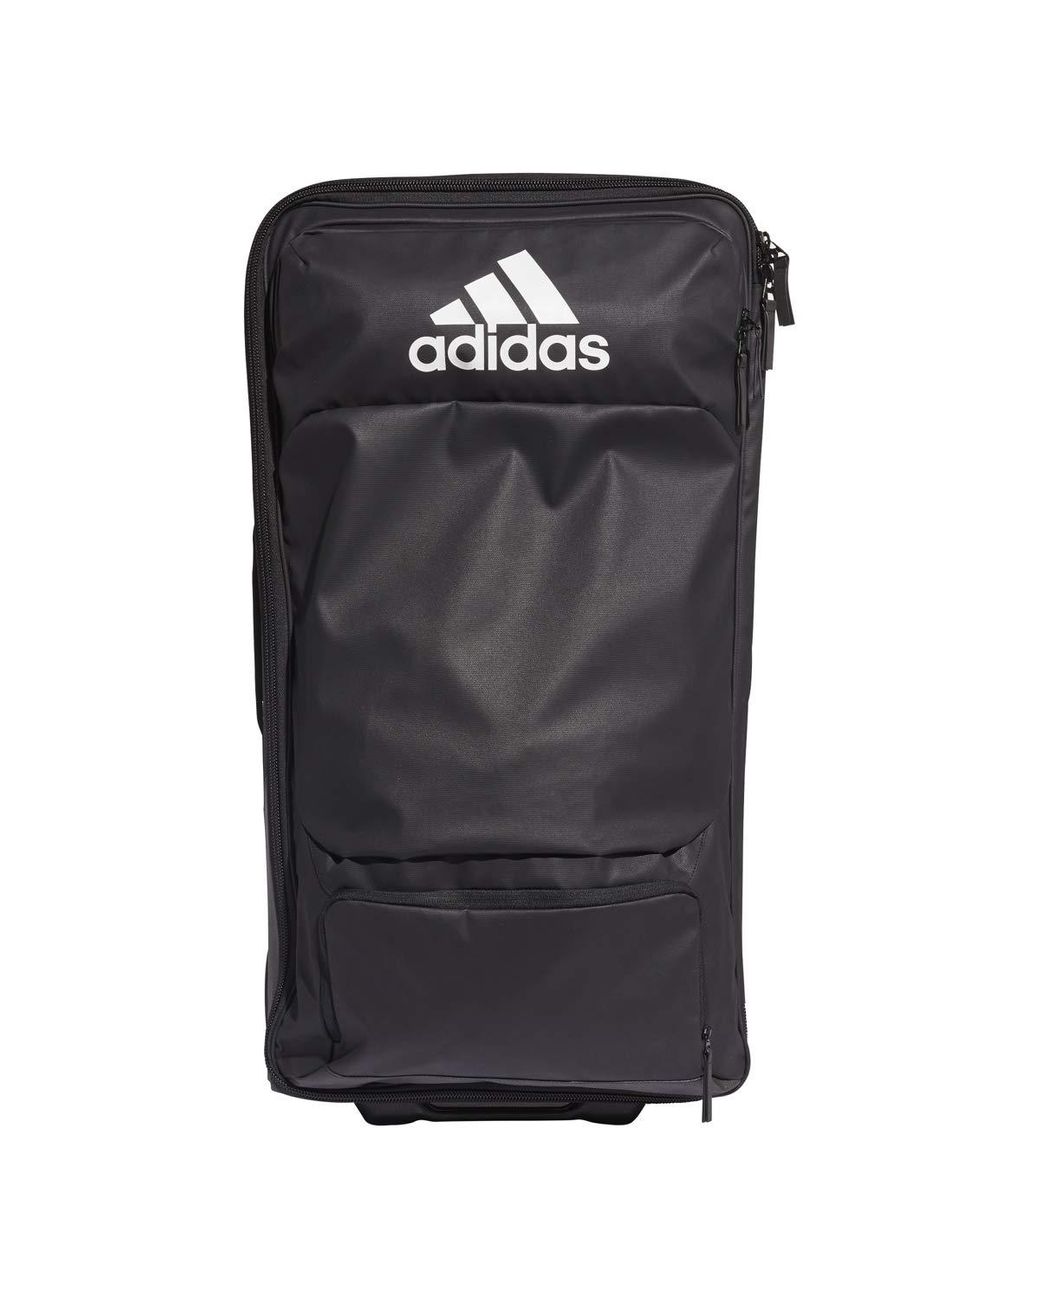 adidas Stadium Ii Team Glove Bag in Black Womens Bags Luggage and suitcases 